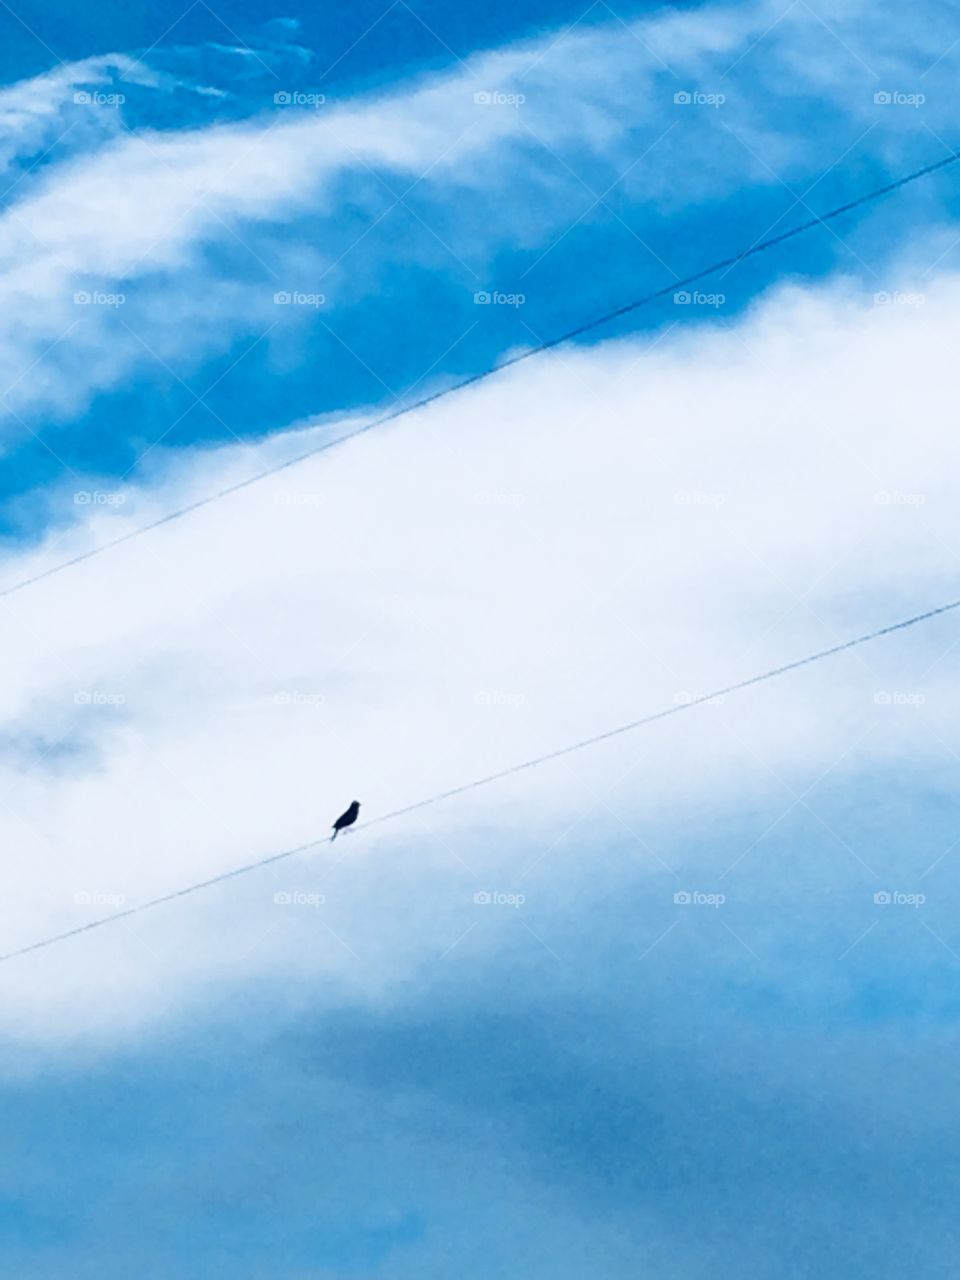 Silhouette of a bird on a wire, wires running parallel to streaks of white clouds against a bright blue sky